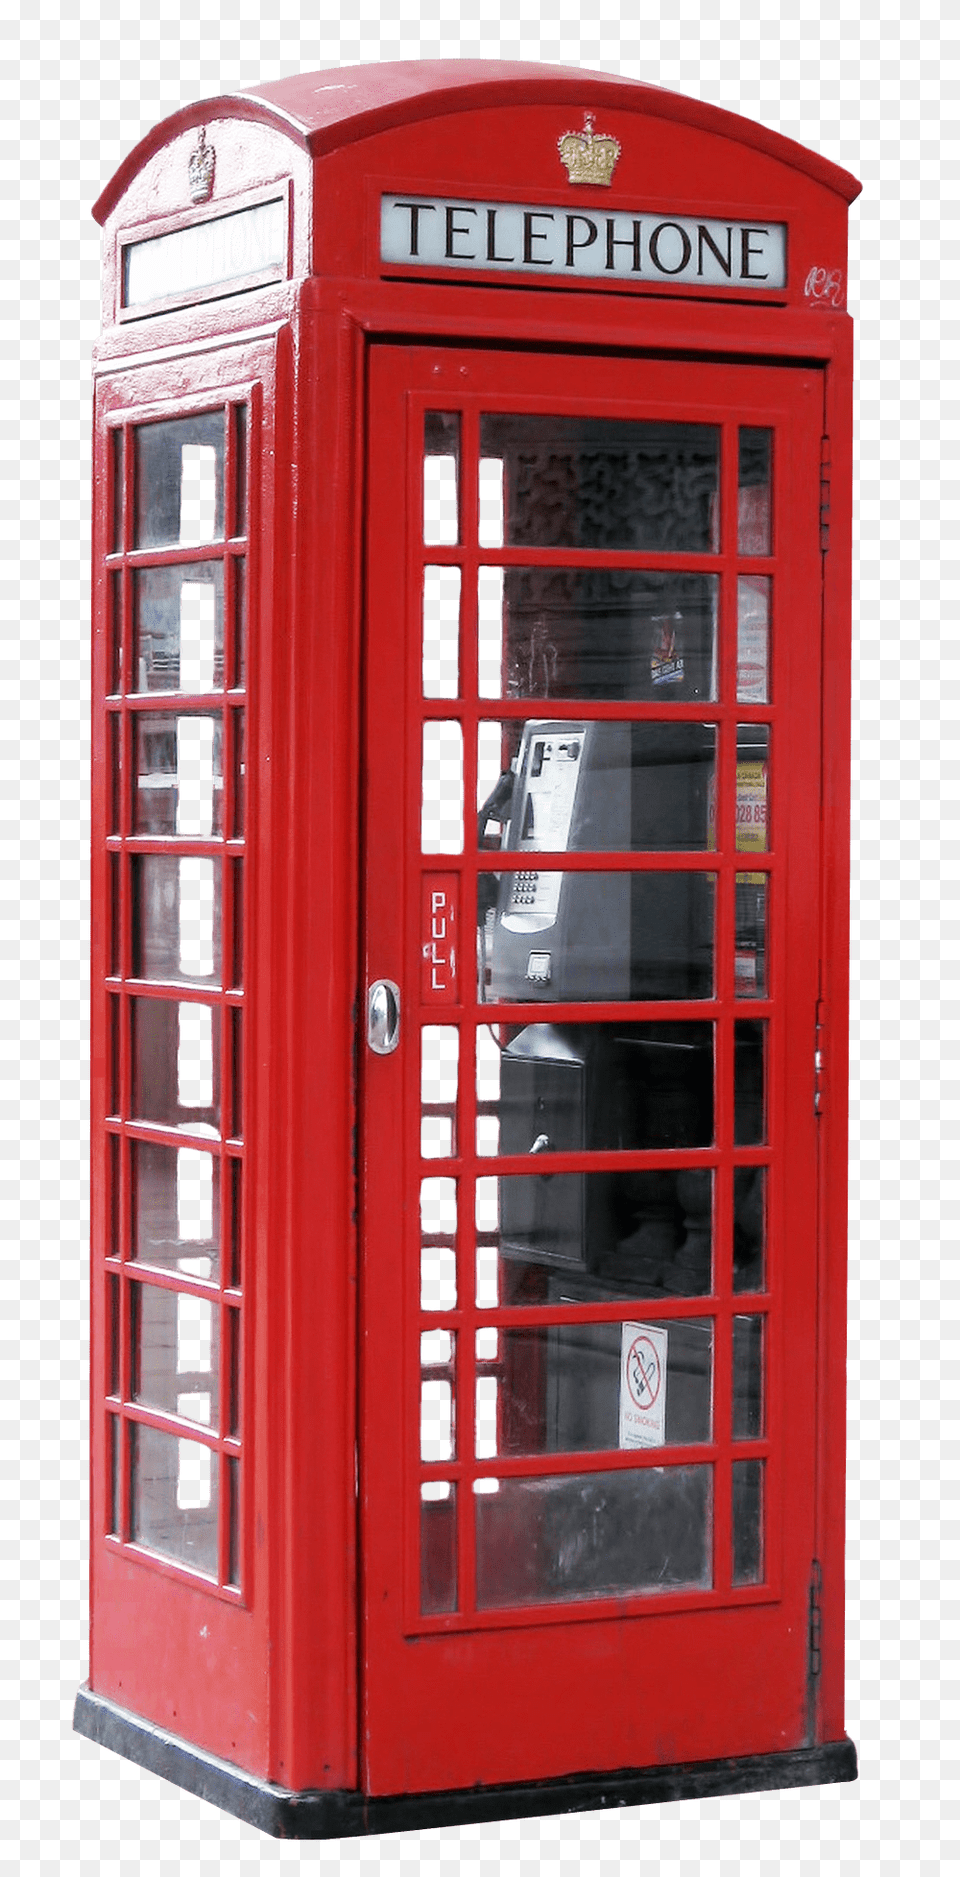 Telephone Booth Side View, Kiosk, Phone Booth Png